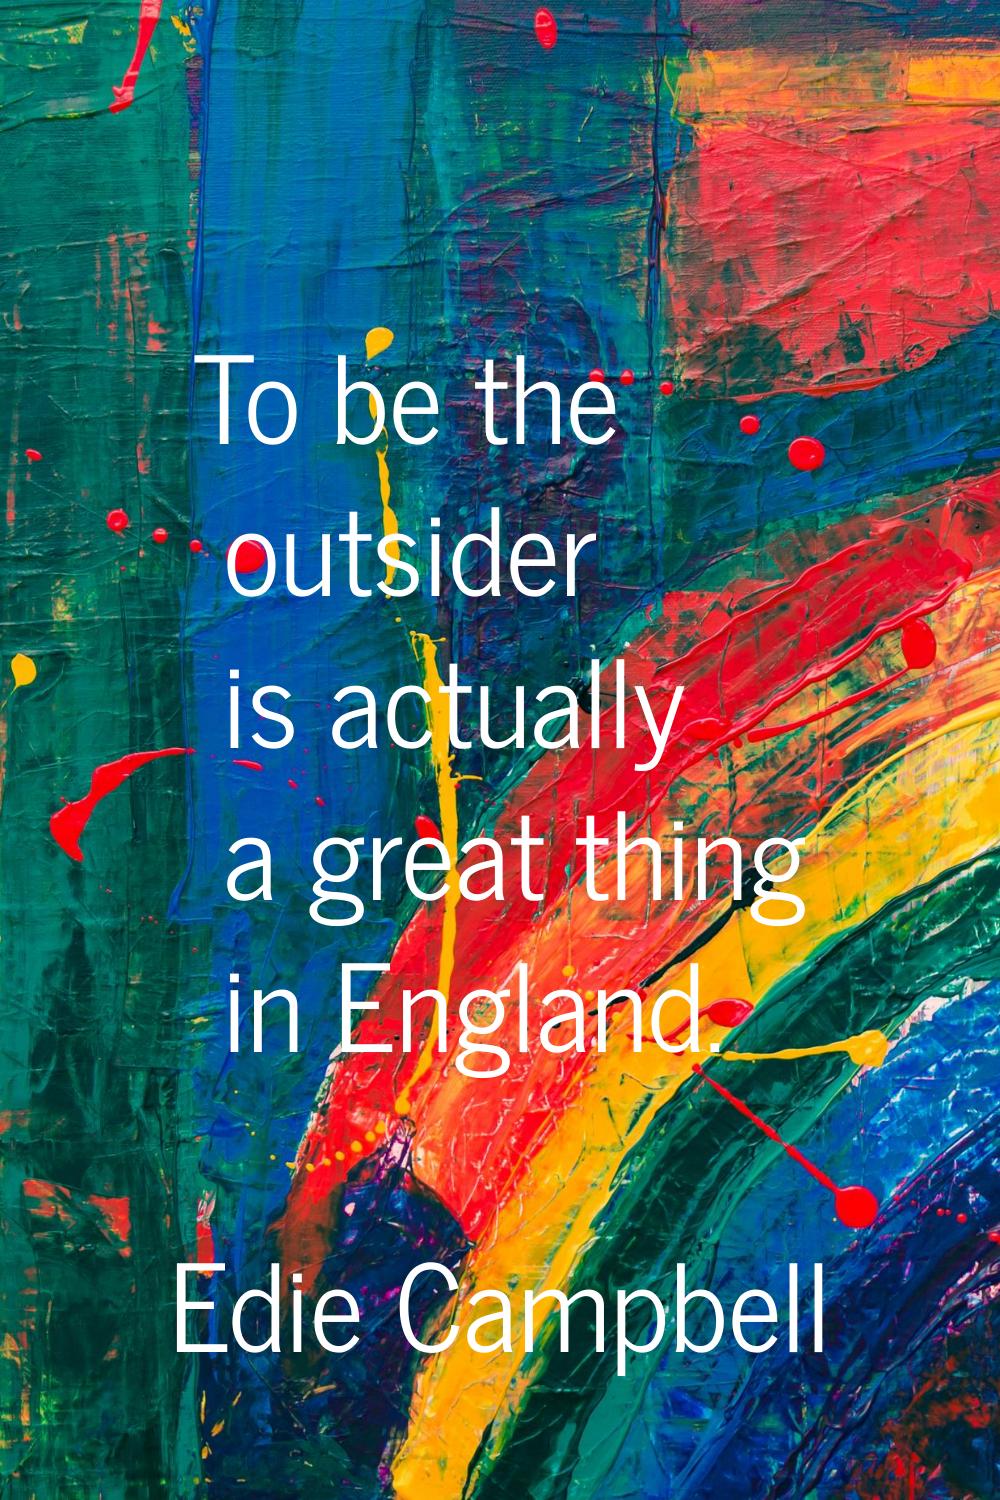 To be the outsider is actually a great thing in England.